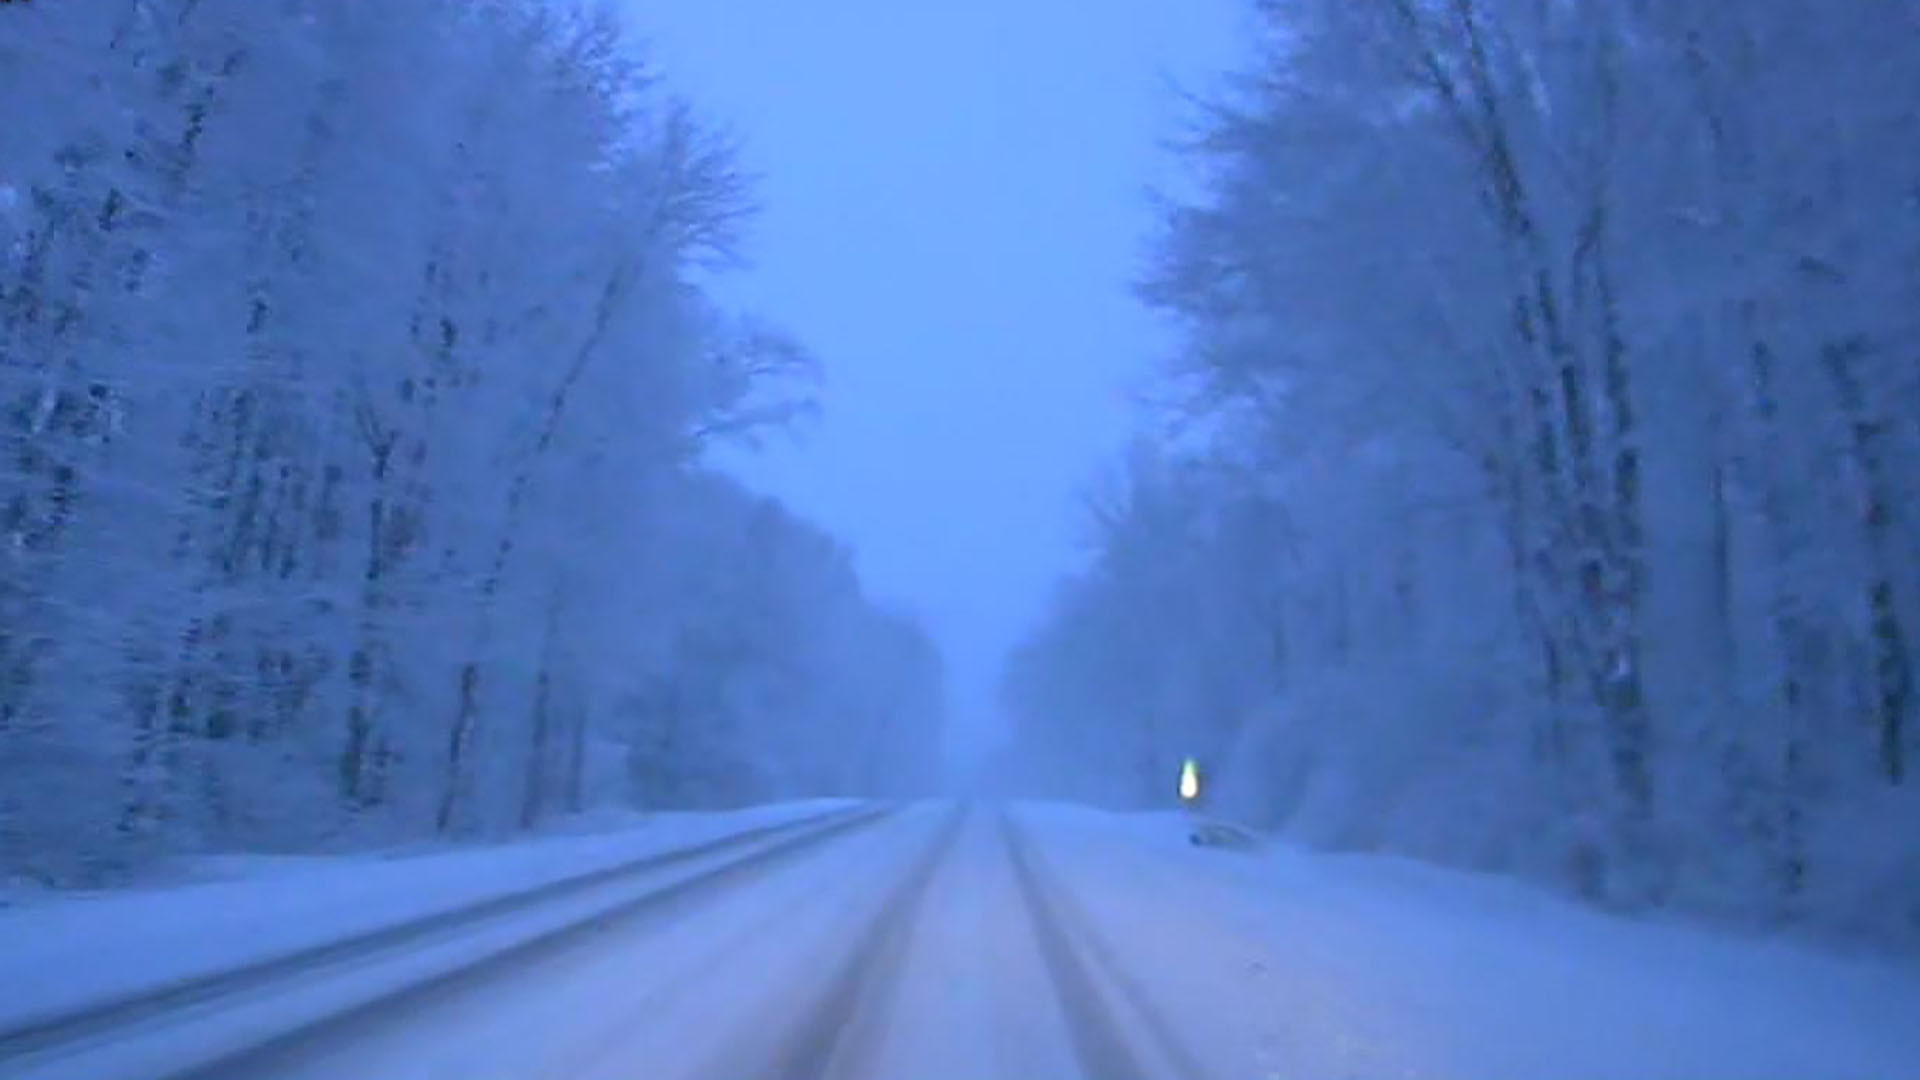 Watch Cbs Mornings Severe Winter Storm Hits The Northeast Full Show On Paramount Plus 7209